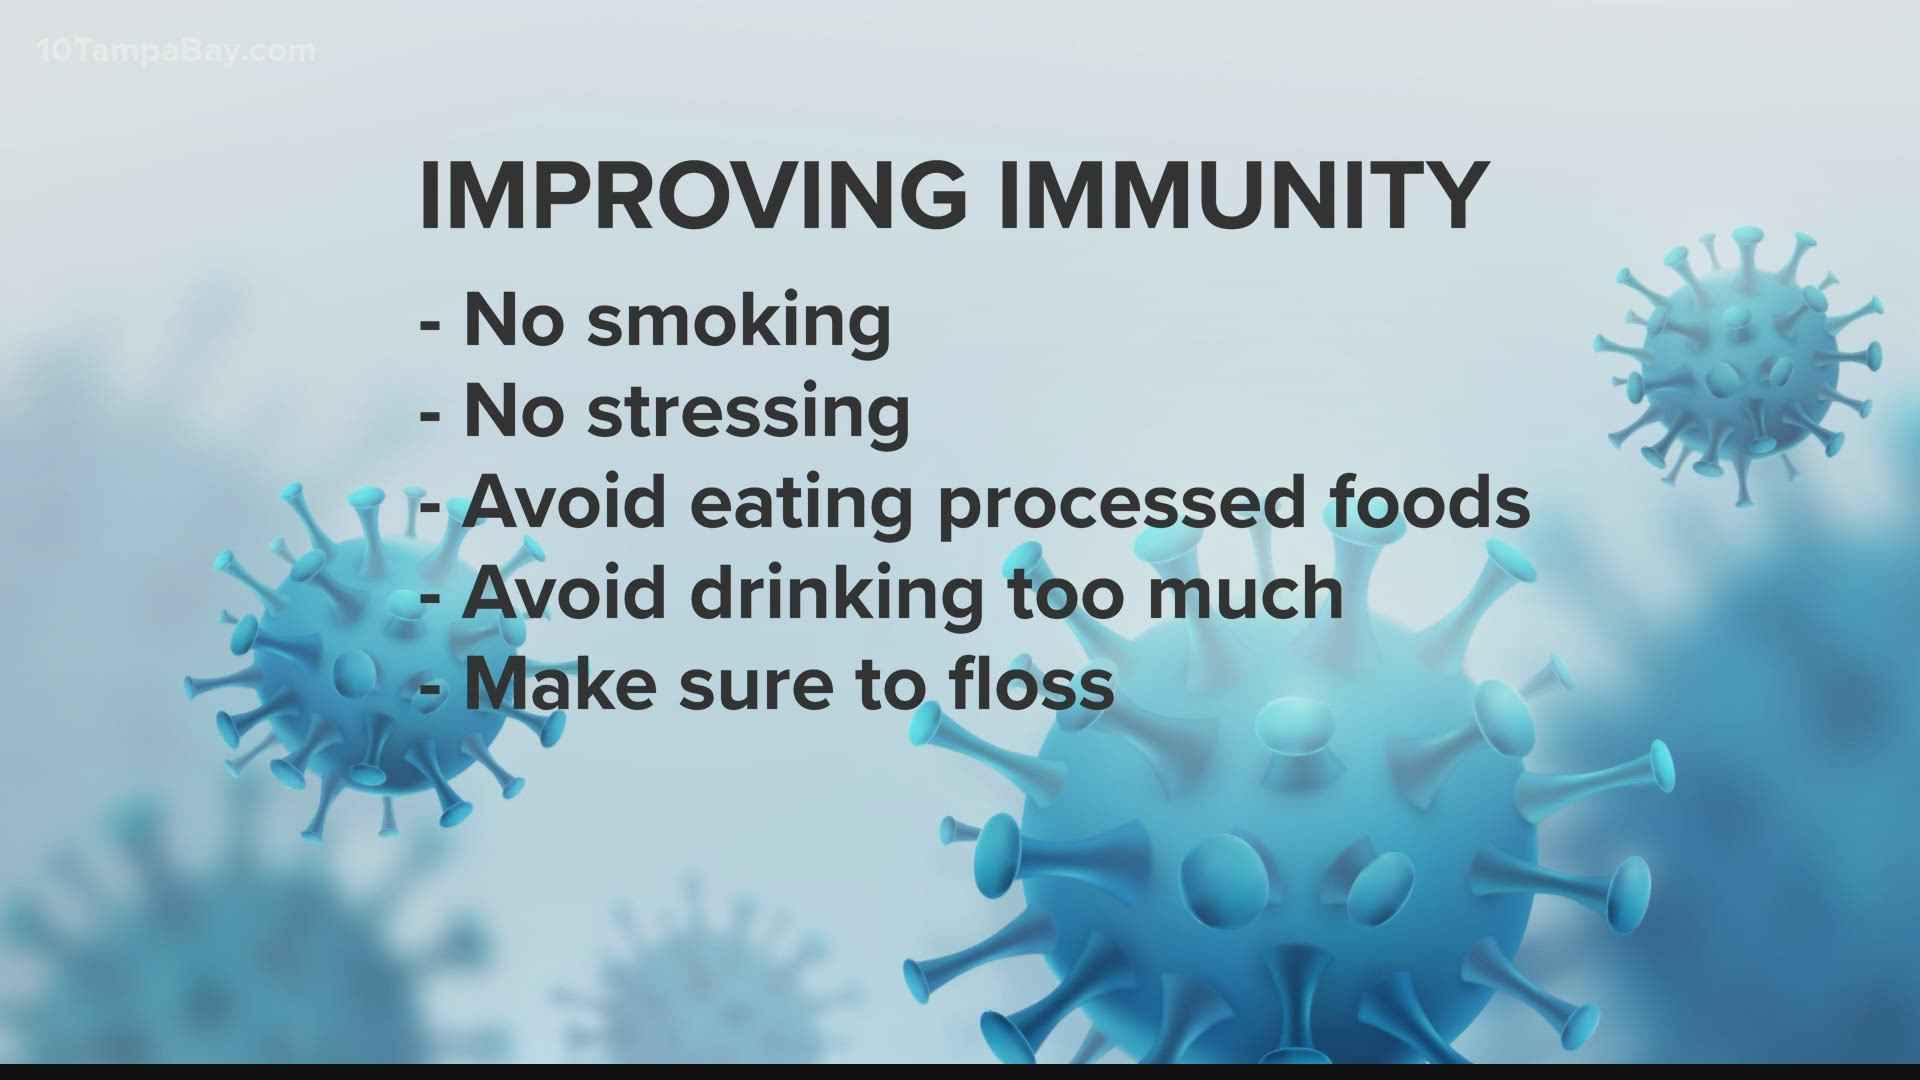 Doctors say there are things we do every day that are harming our immune system.